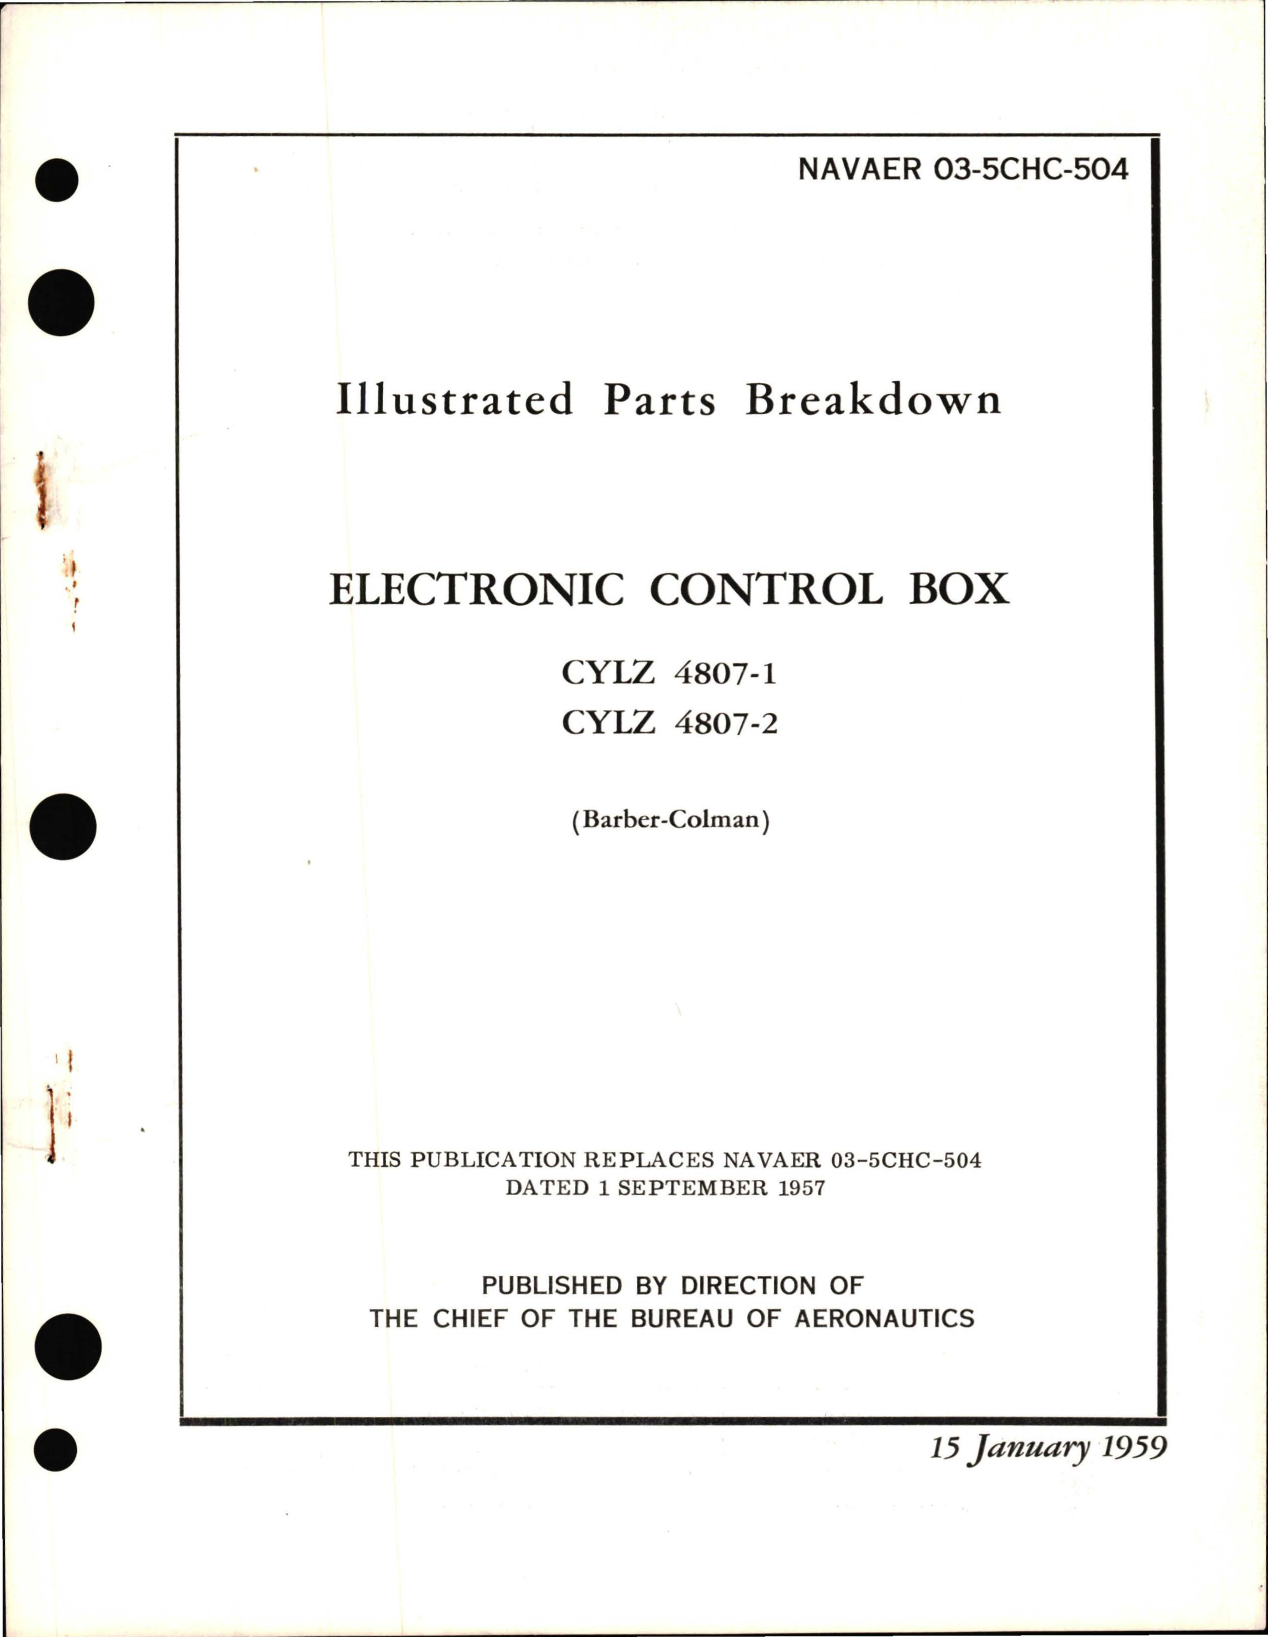 Sample page 1 from AirCorps Library document: Illustrated Parts Breakdown for Electronic Control Box - CYLZ 4807-1 and CYLZ 4807-2